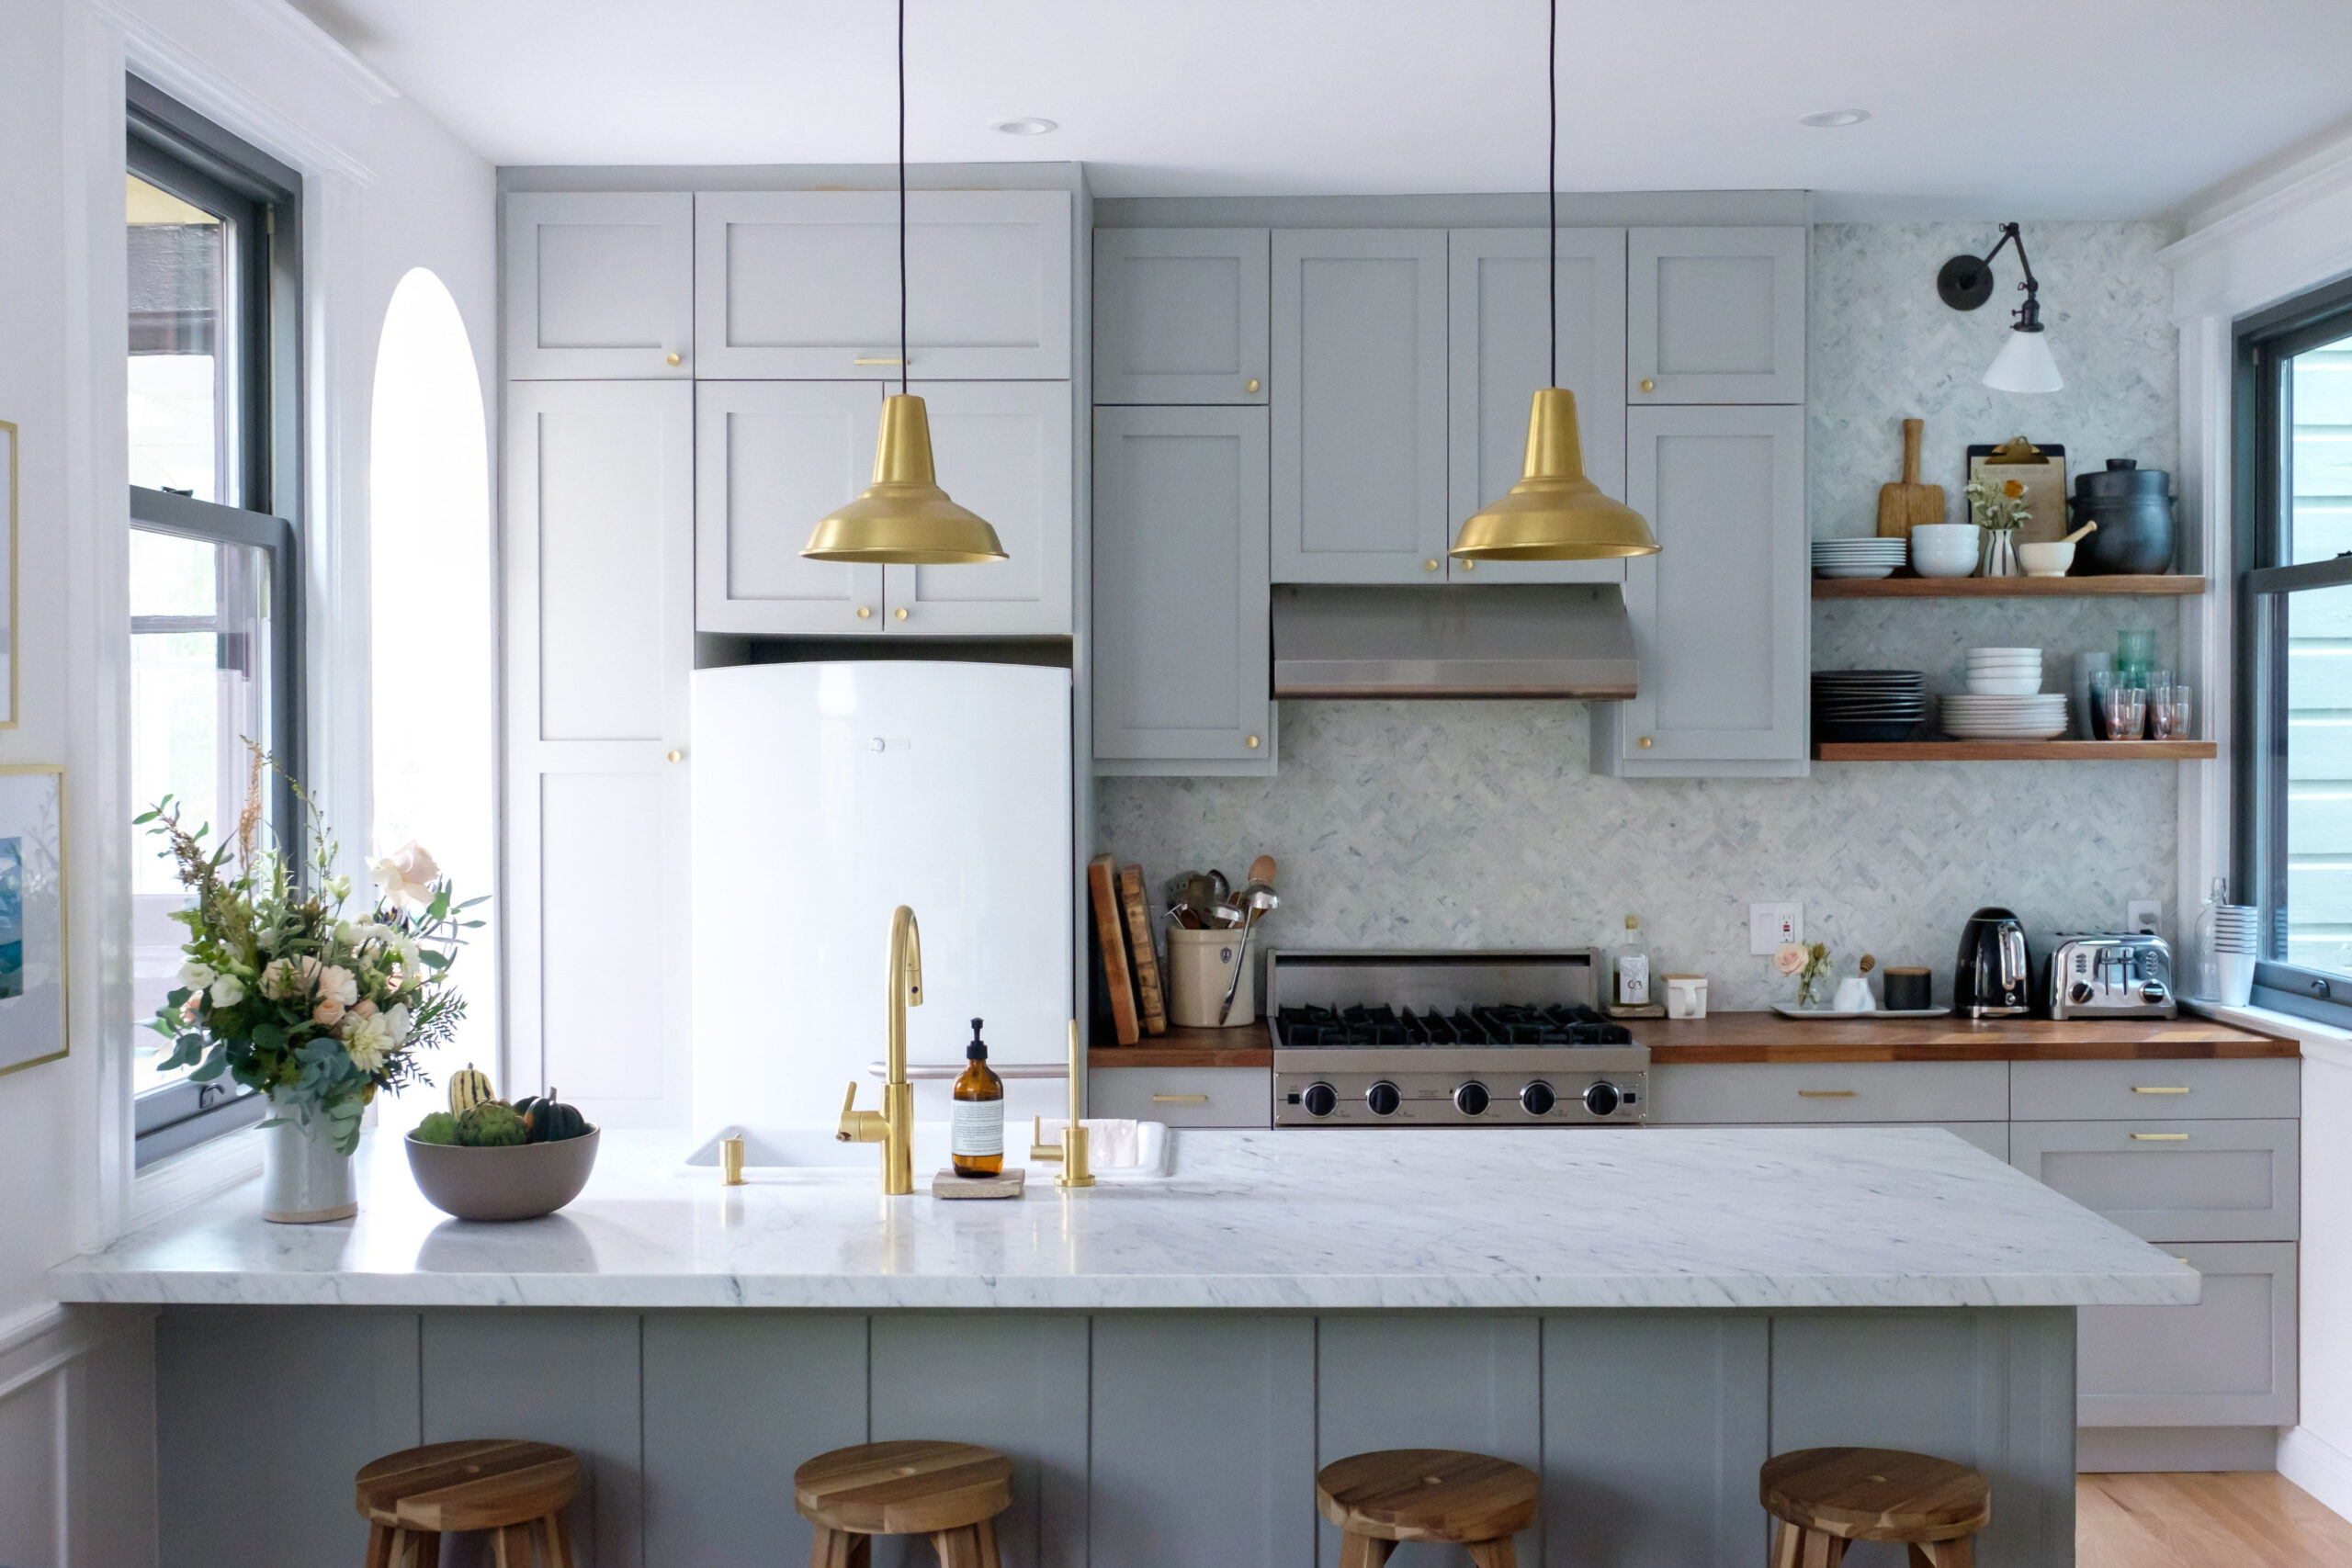 Why IKEA Kitchens Are So Popular -  Reasons Designers Love Ikea